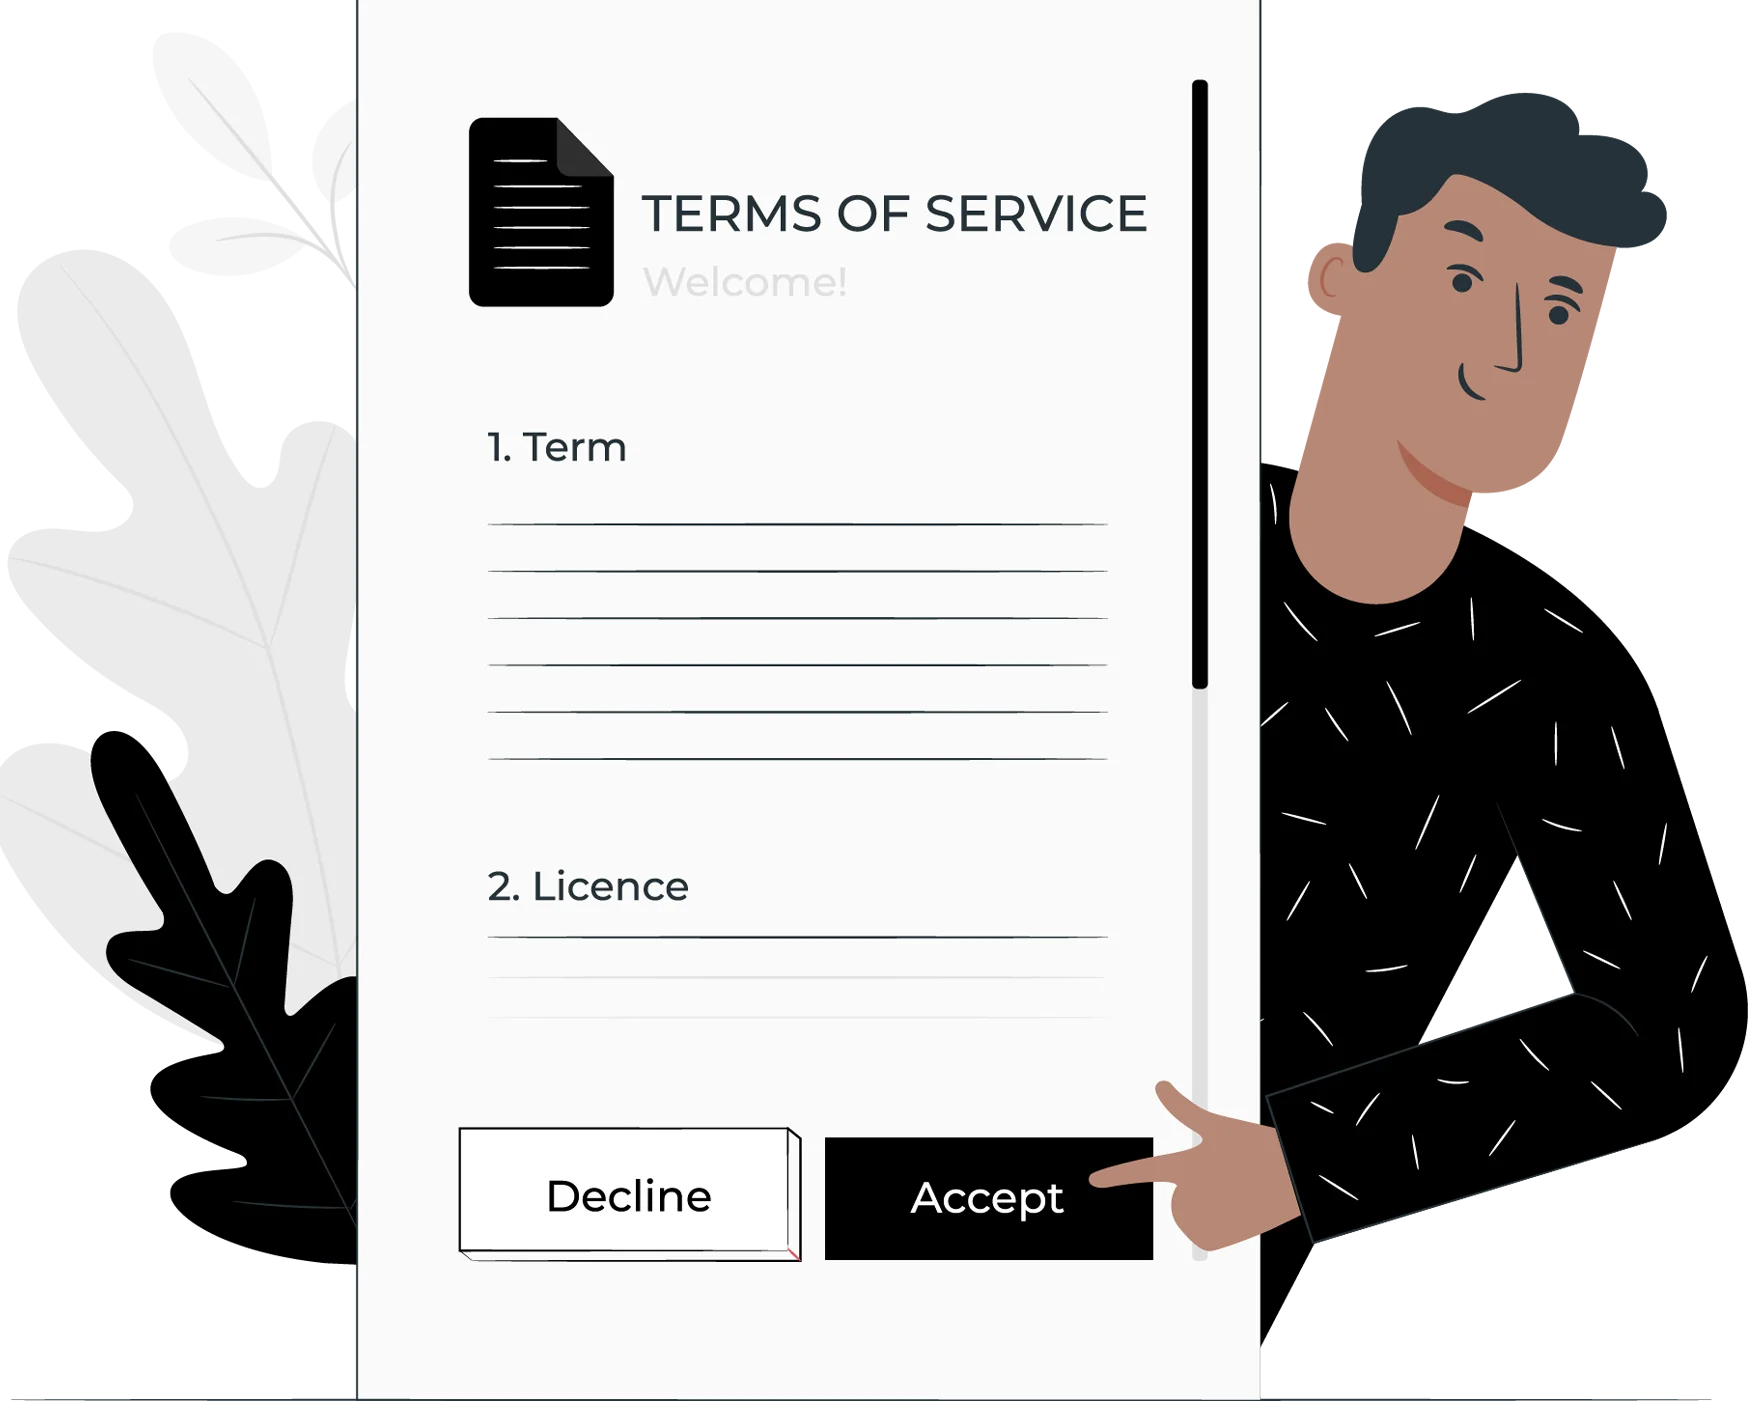 Terms & Conditions image